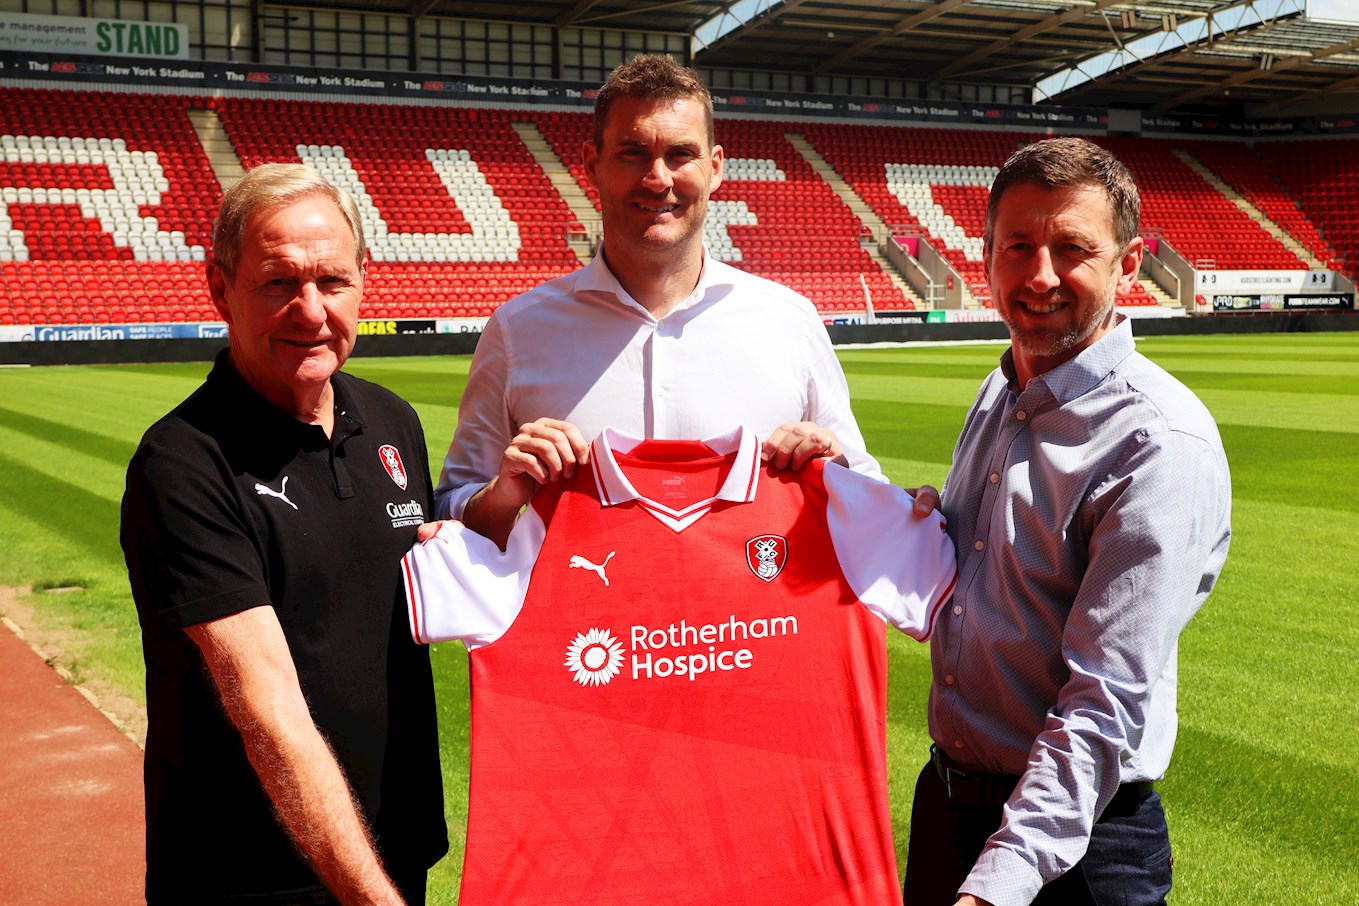 Rotherham United FC proudly support the Hospice - Rotherham Hospice